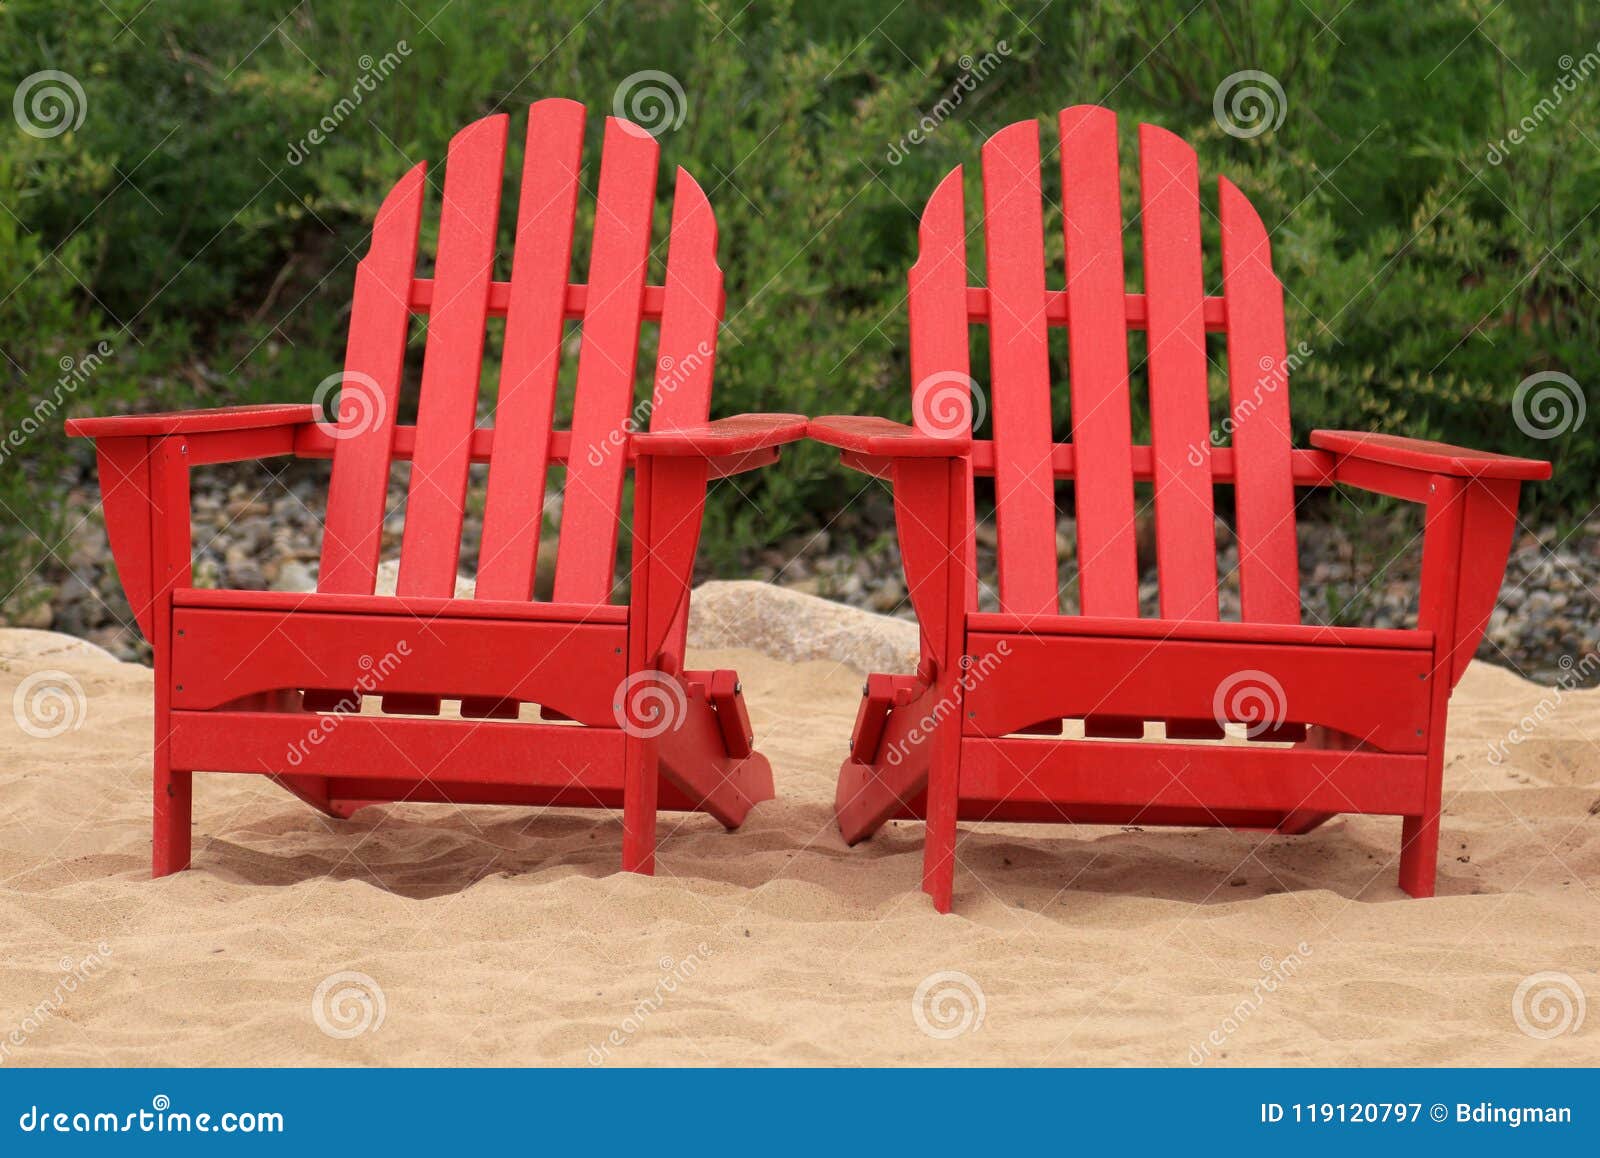 Colorful Adirondack Chairs Stock Image Image Of Outdoor 119120797